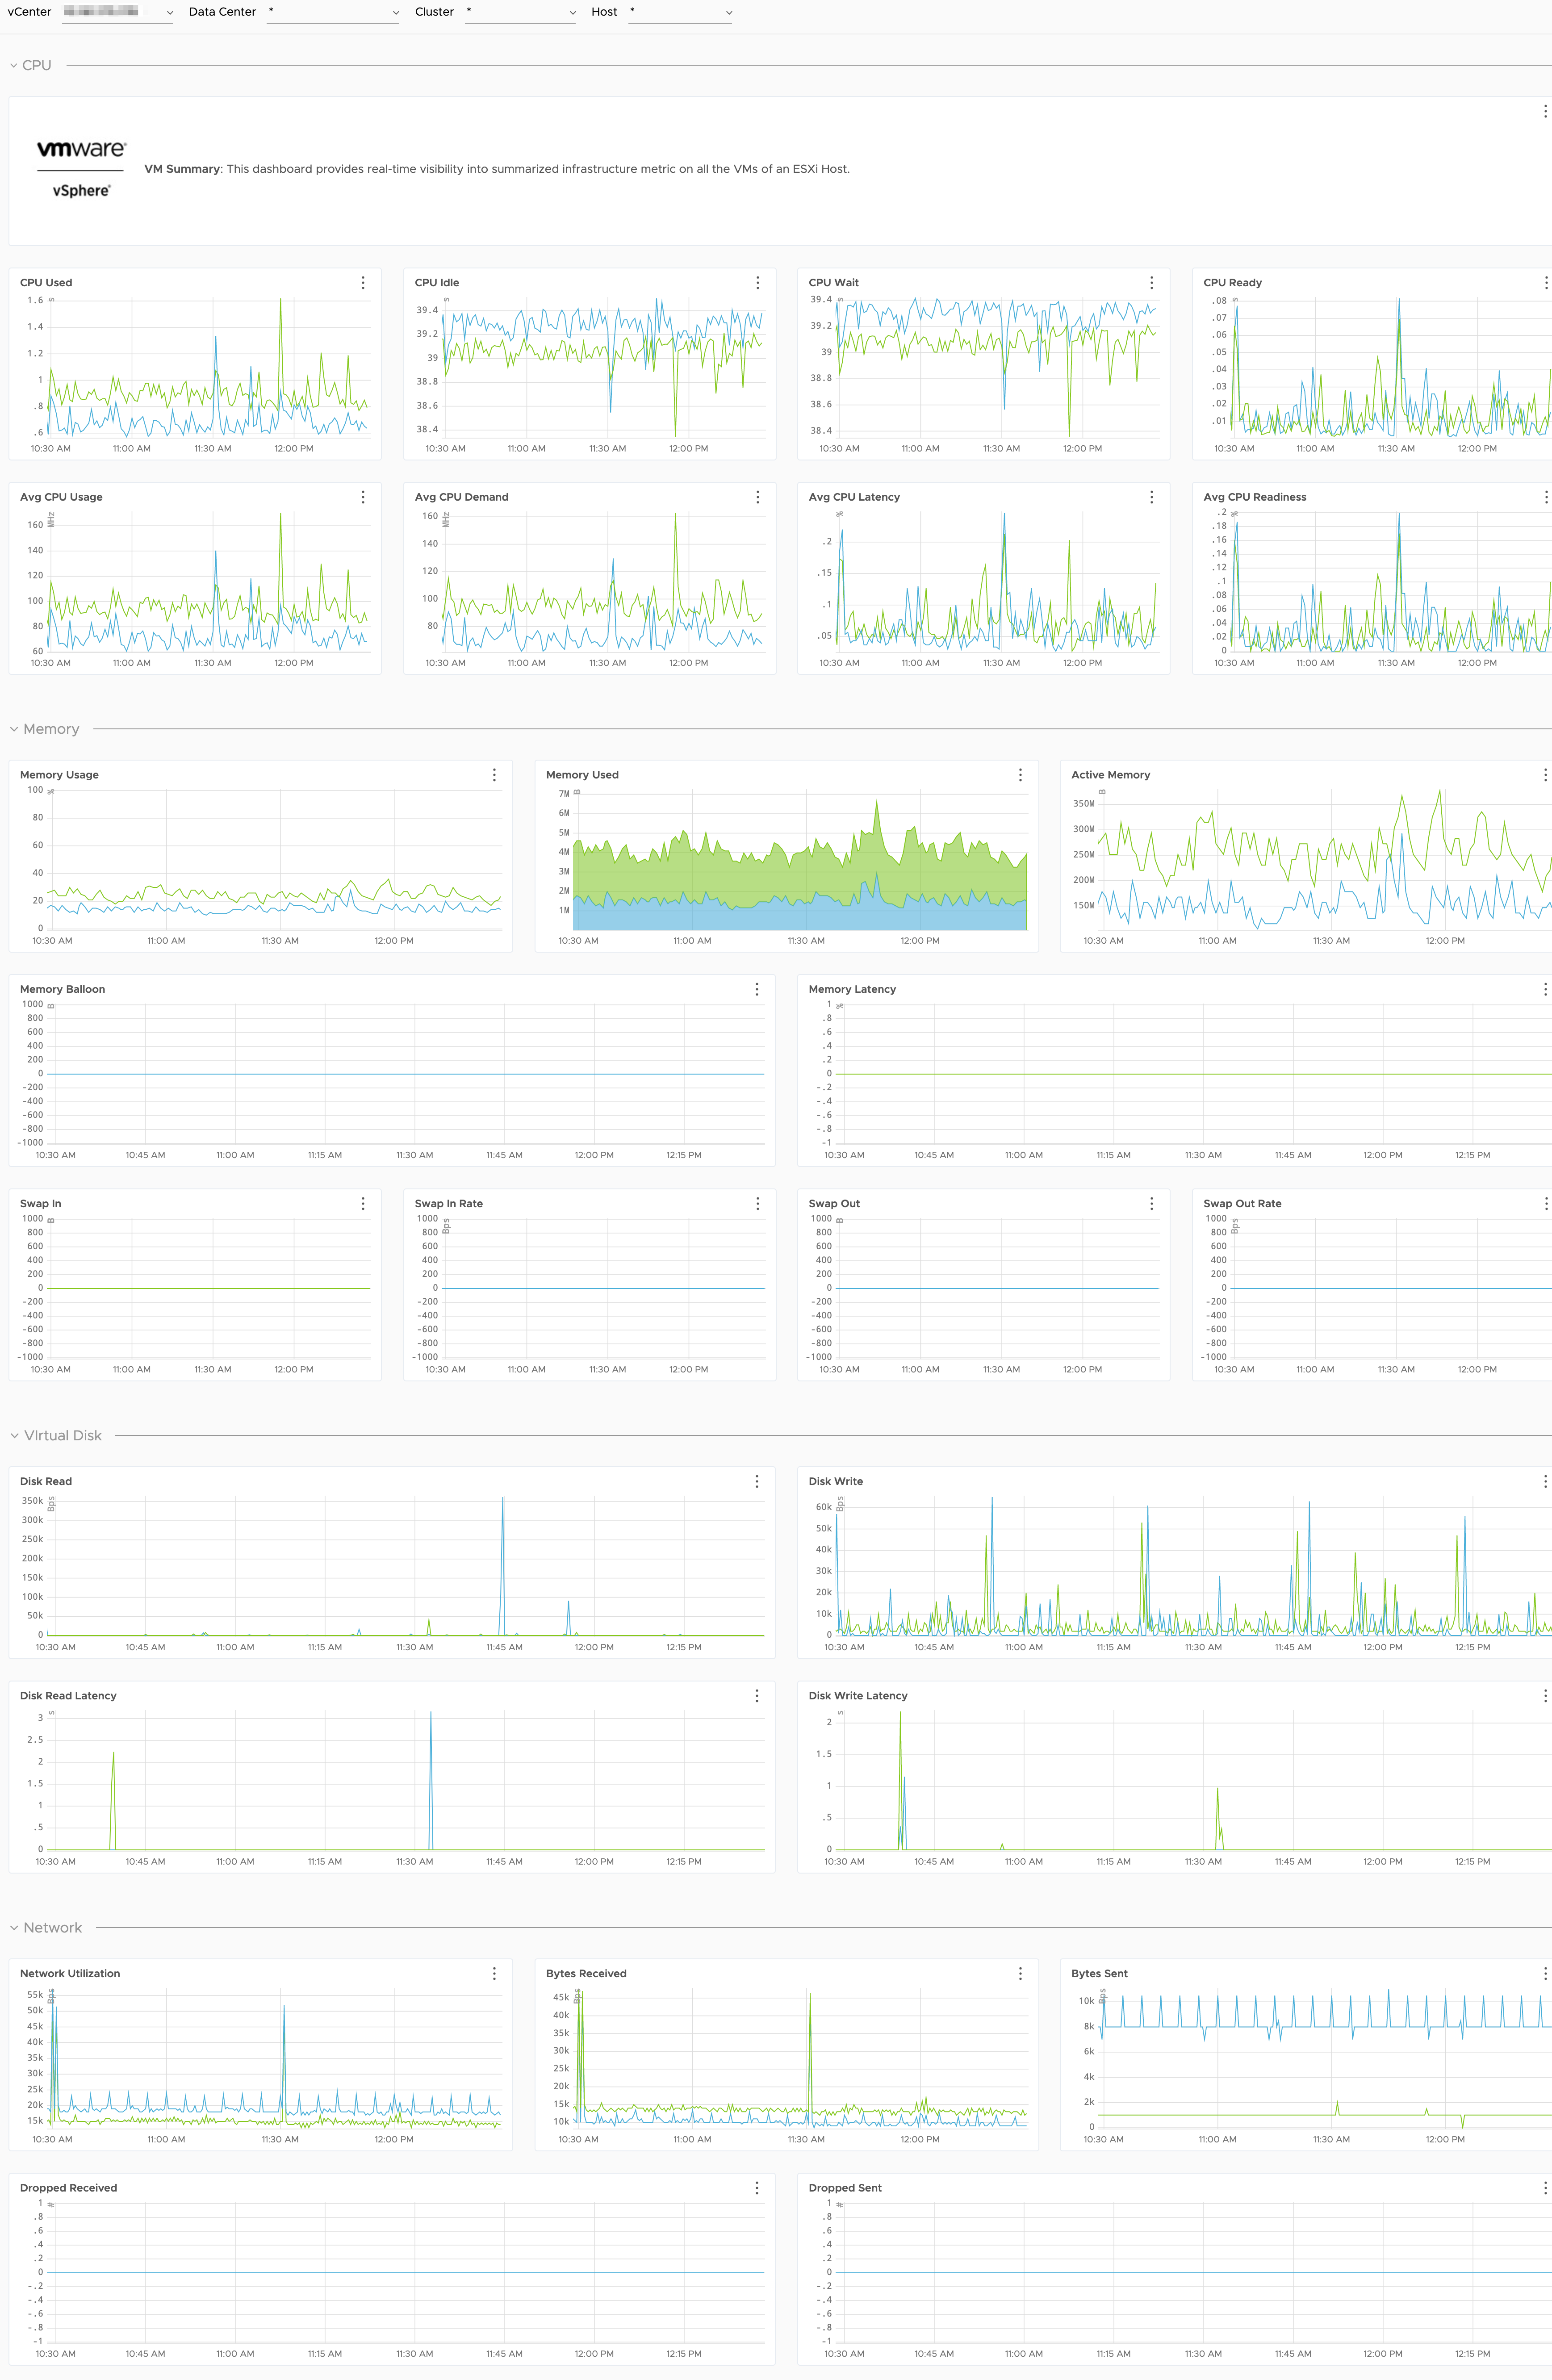 images/vsphere_vm_summary.png